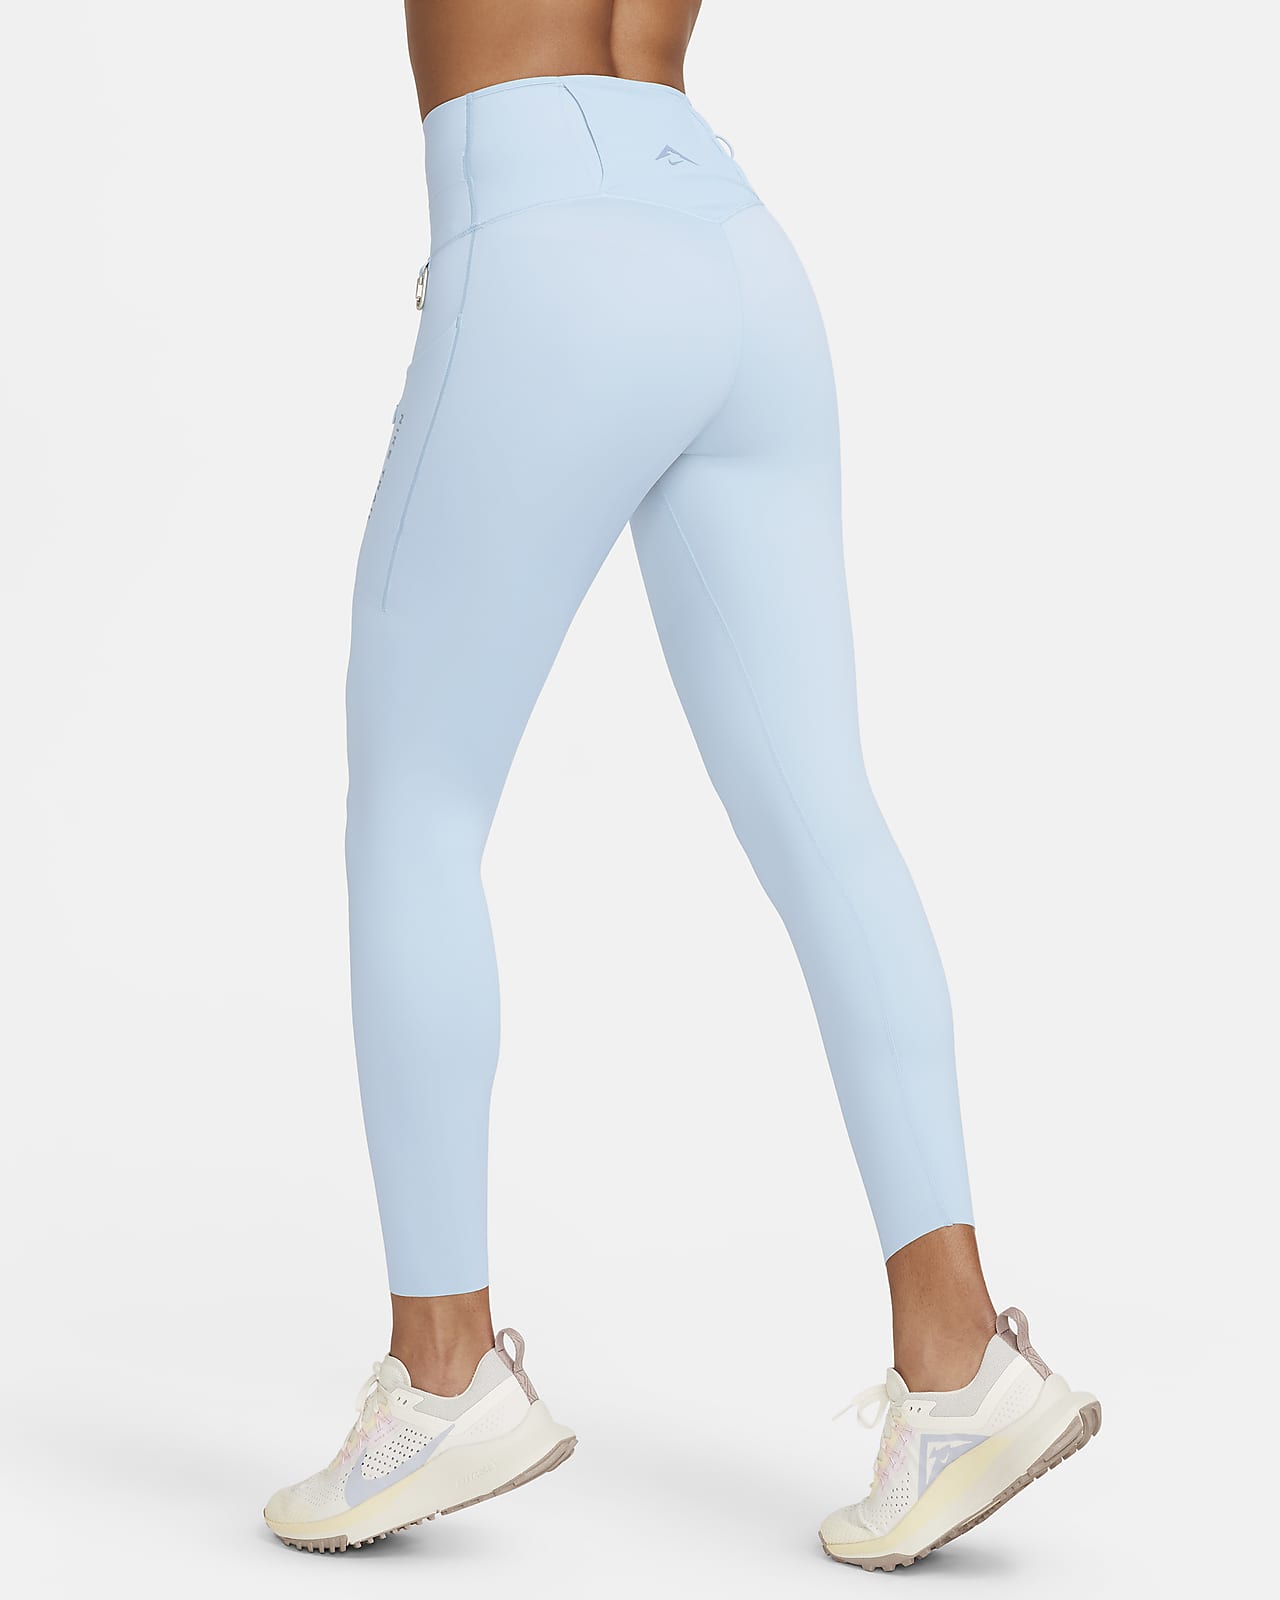 Nike Trail Go Women's Firm-Support High-Waisted 7/8 Leggings with Pockets